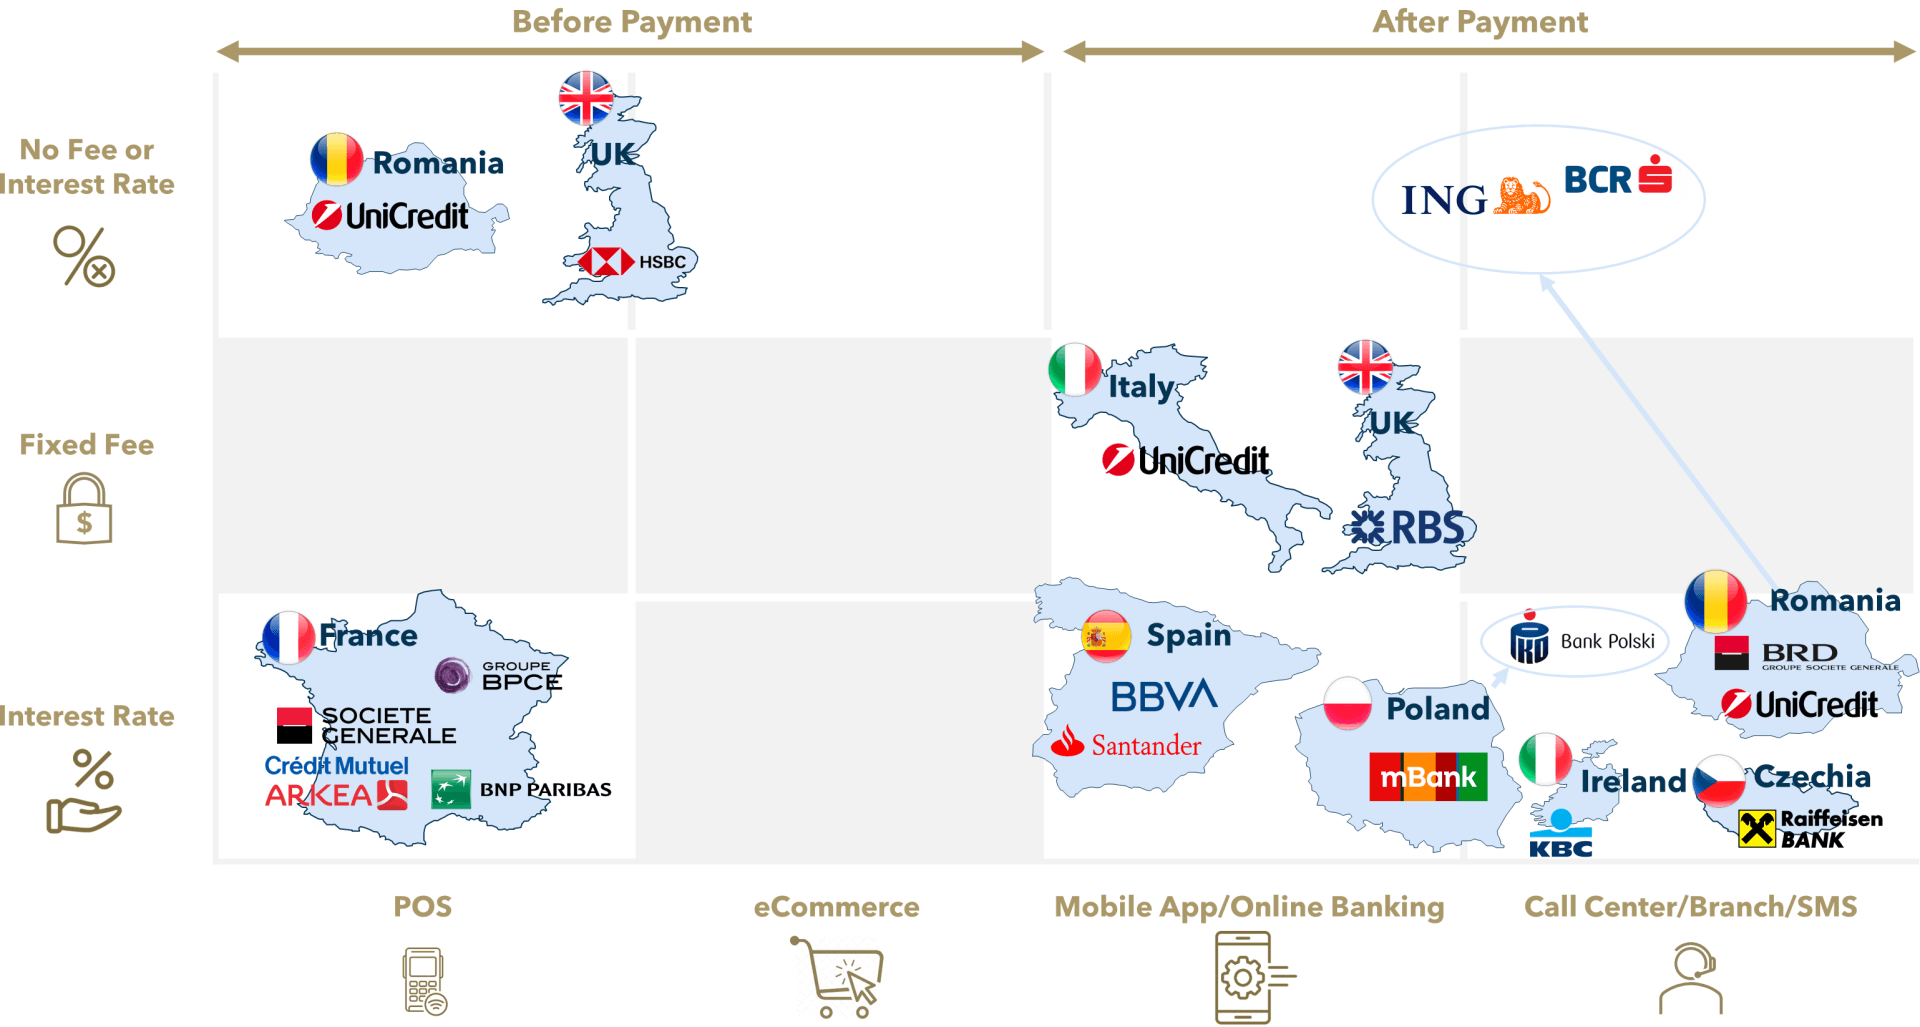 FIGURE 3: EU Bank Credit Card Installment Offerings by Country